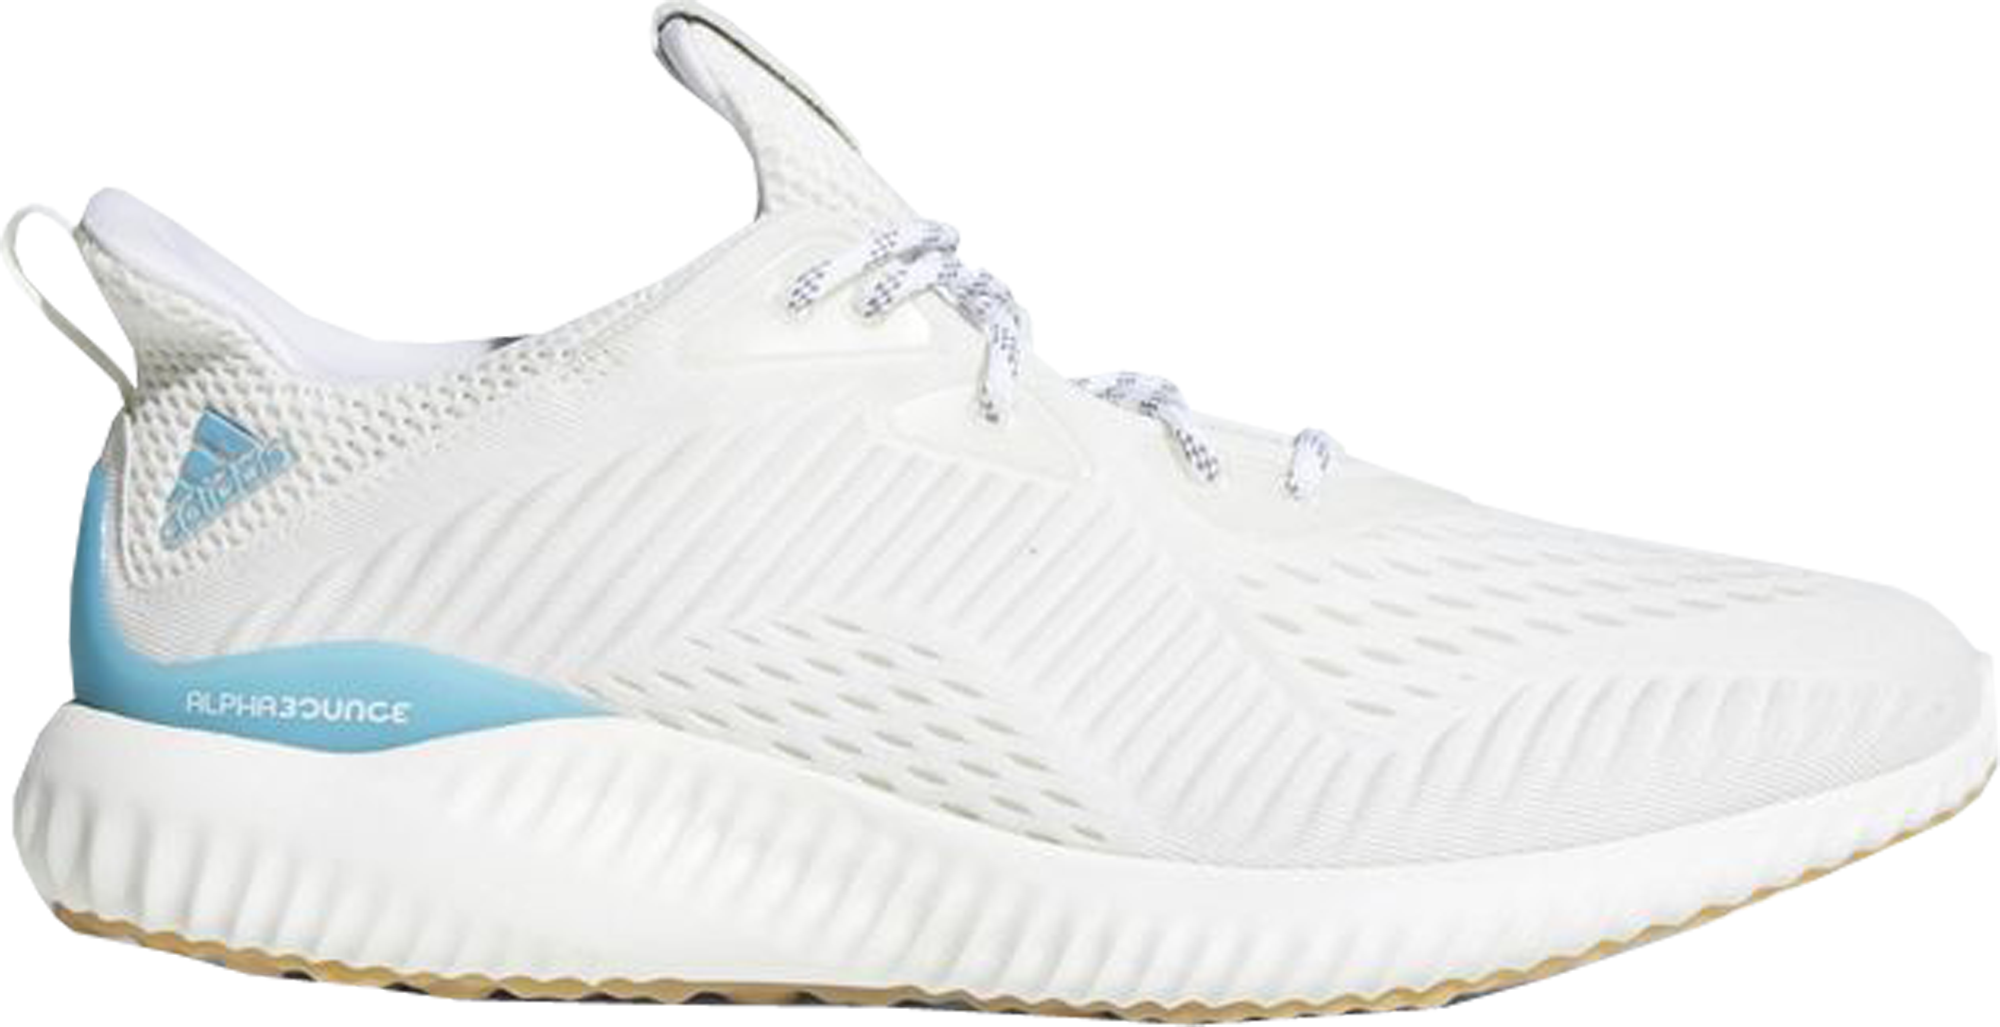 adidas alphabounce parley review